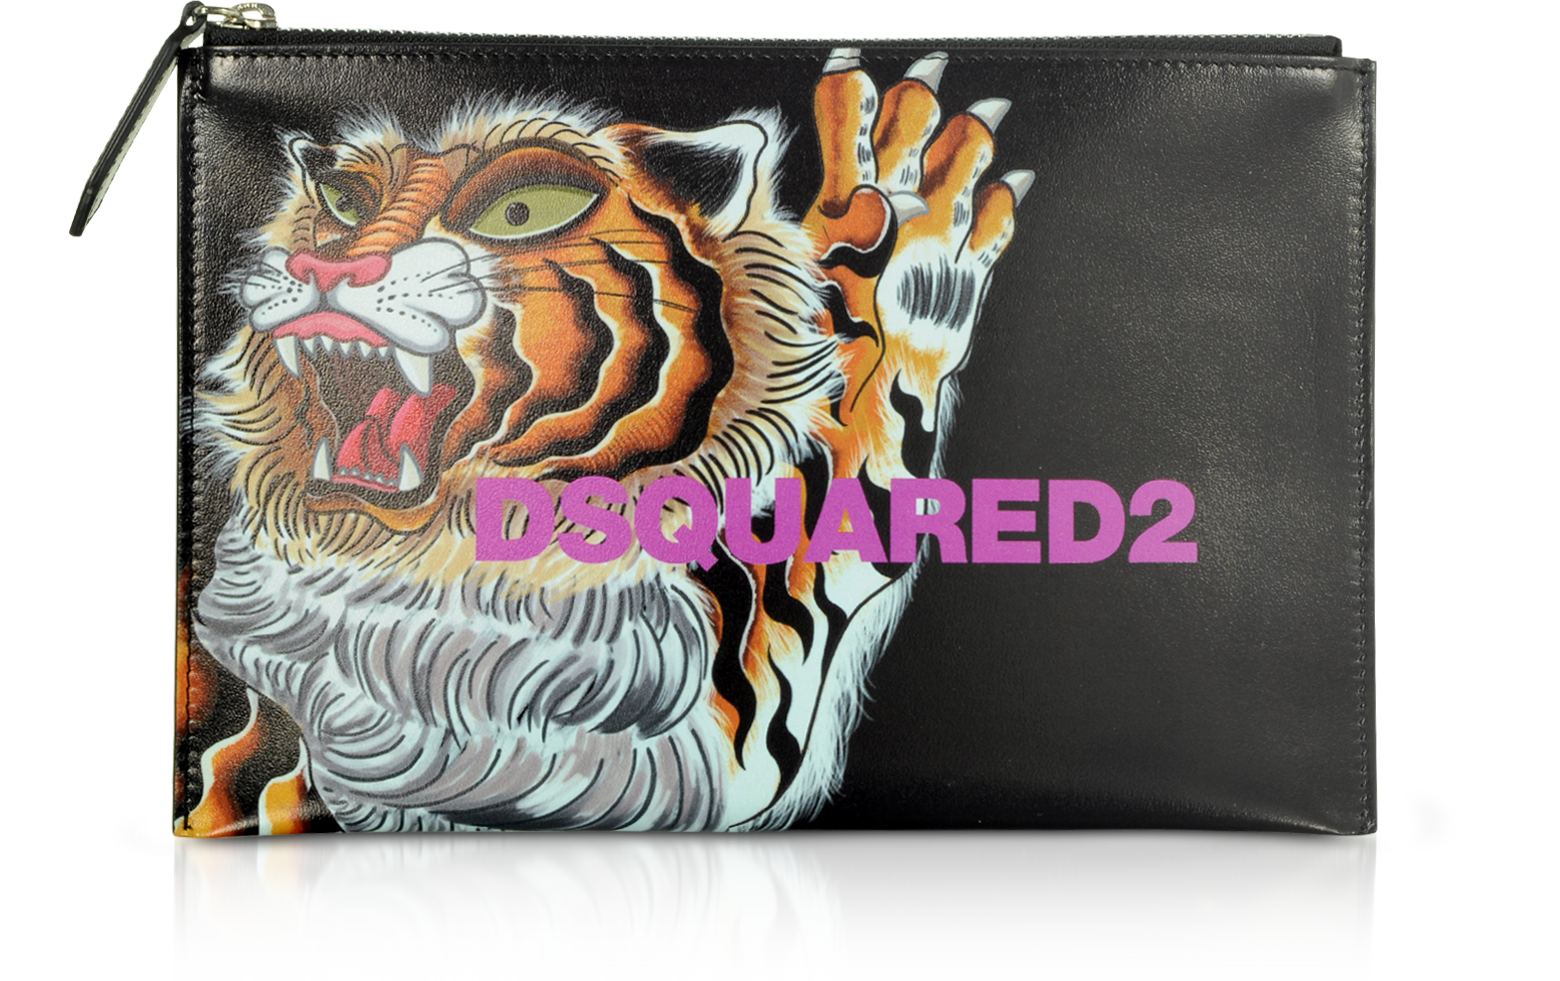 dsquared pouch